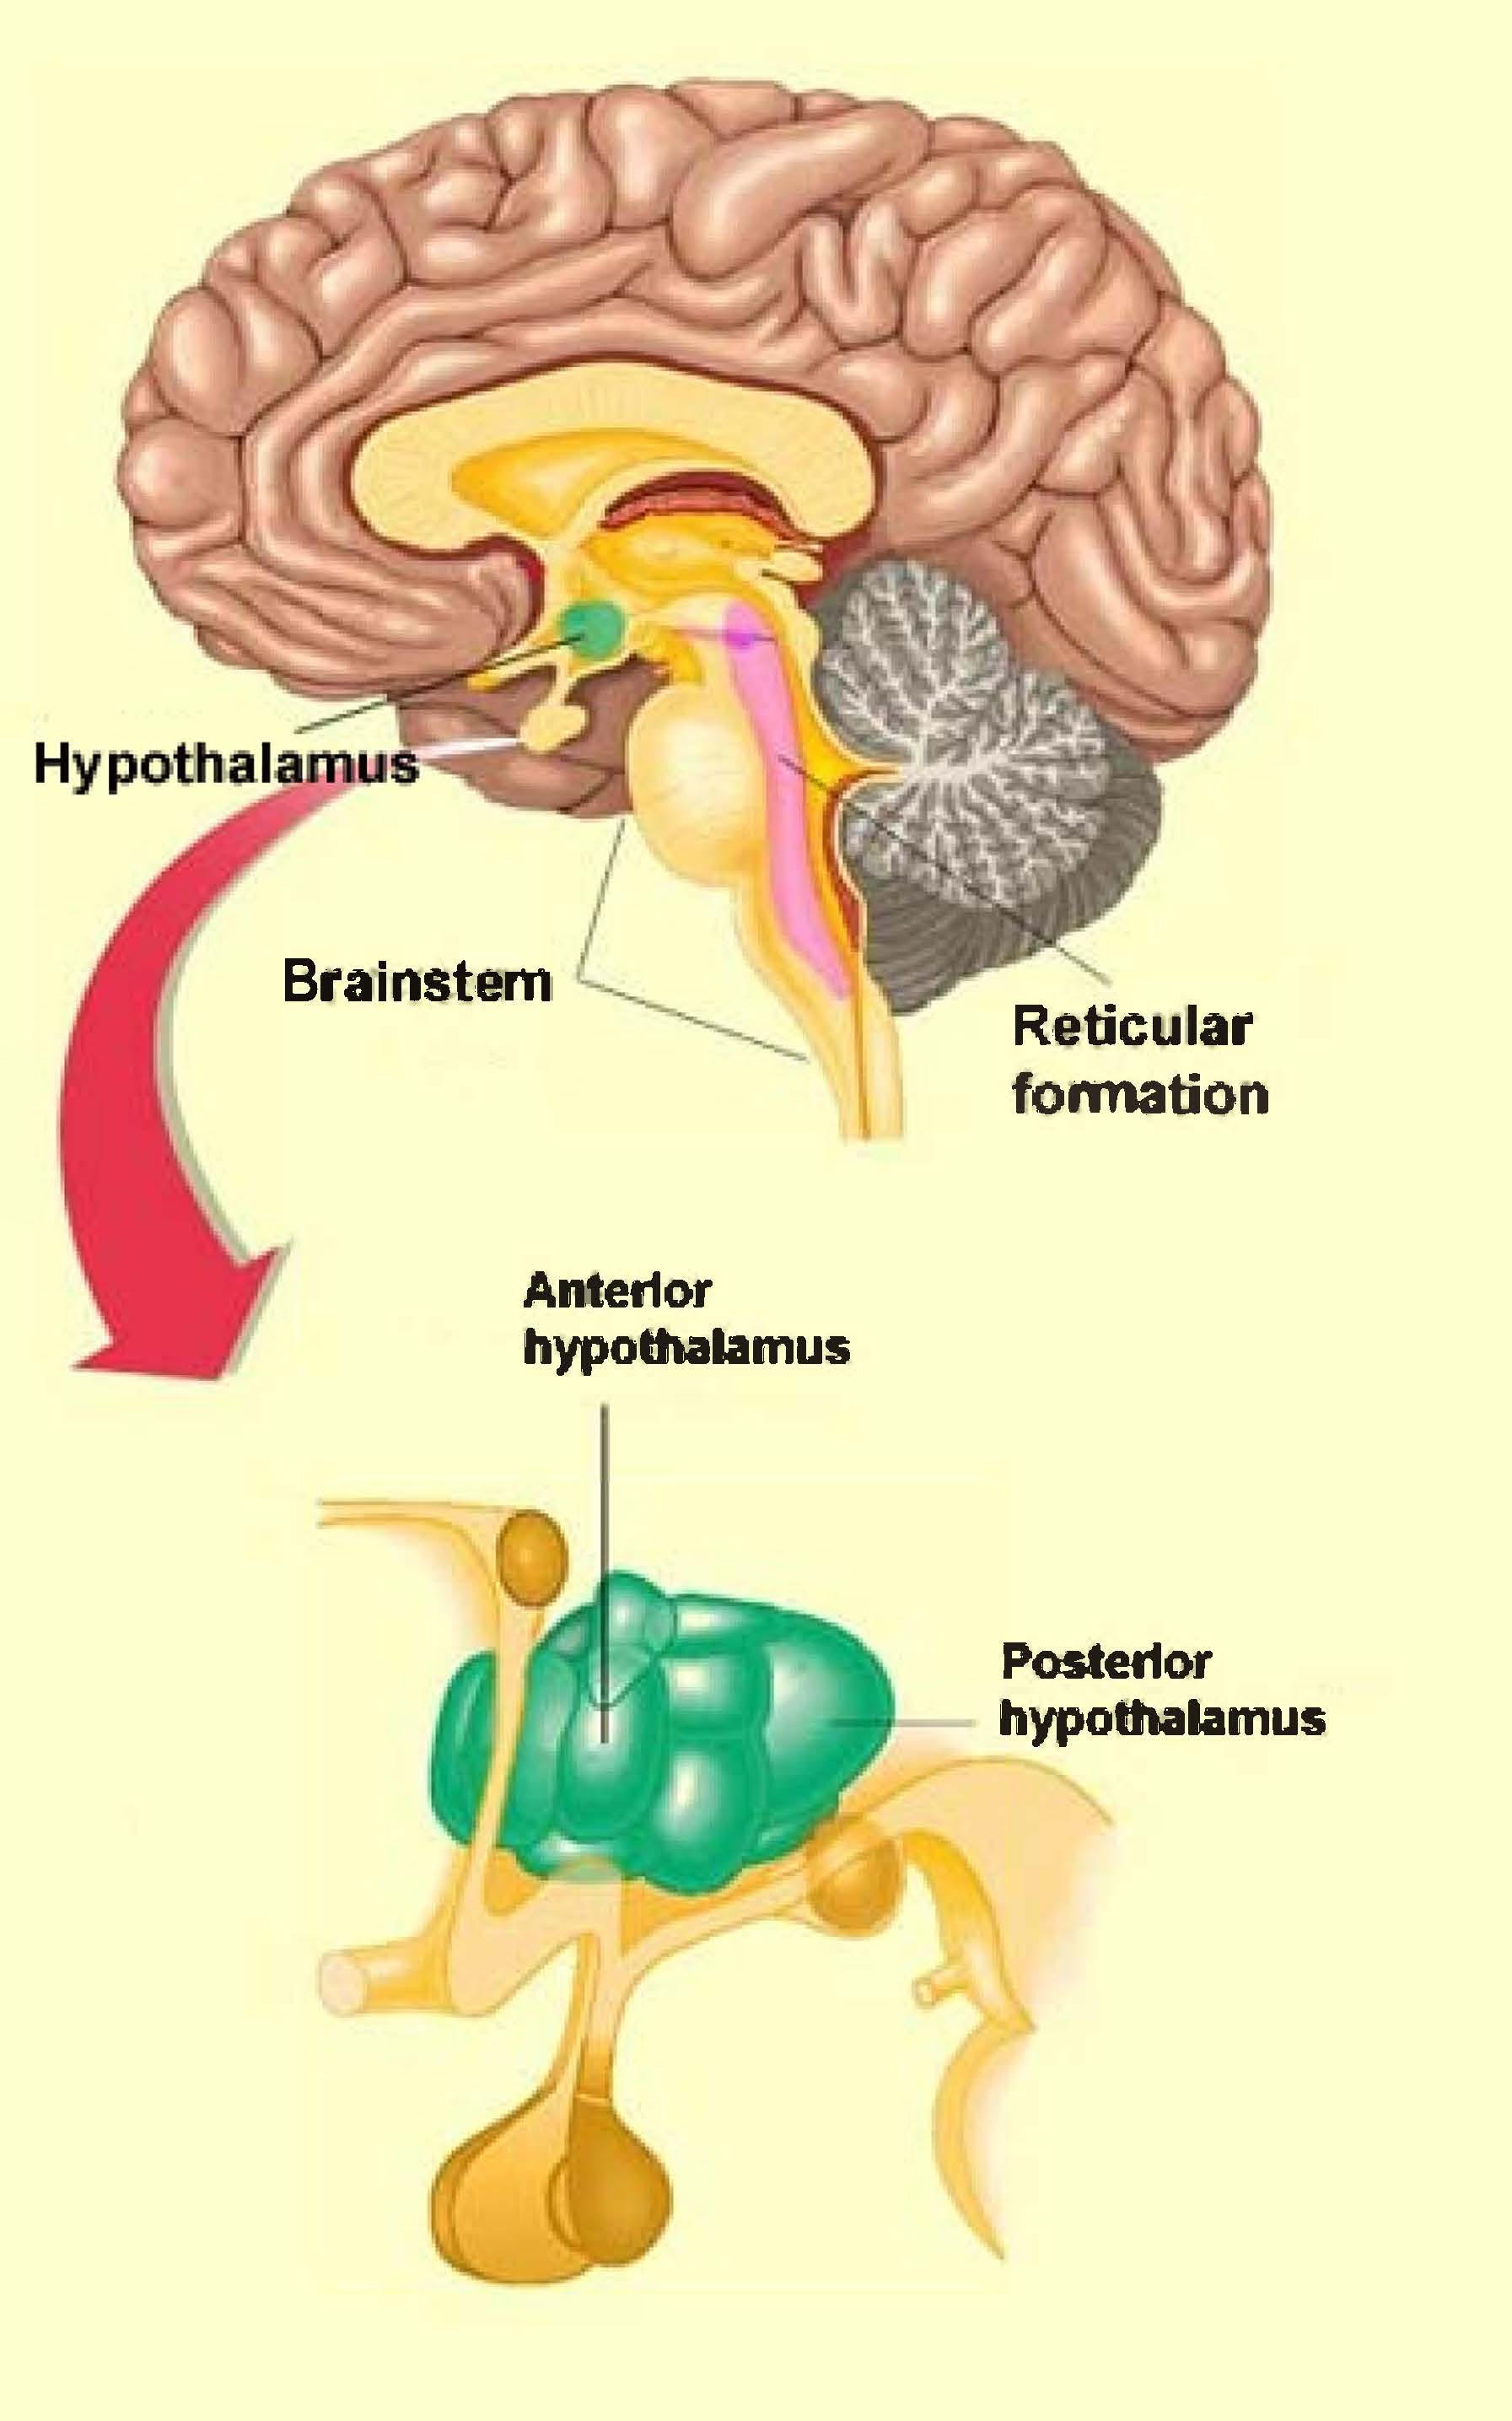 Drawing of a mid-section of the brain and hypothalamic nuclei.